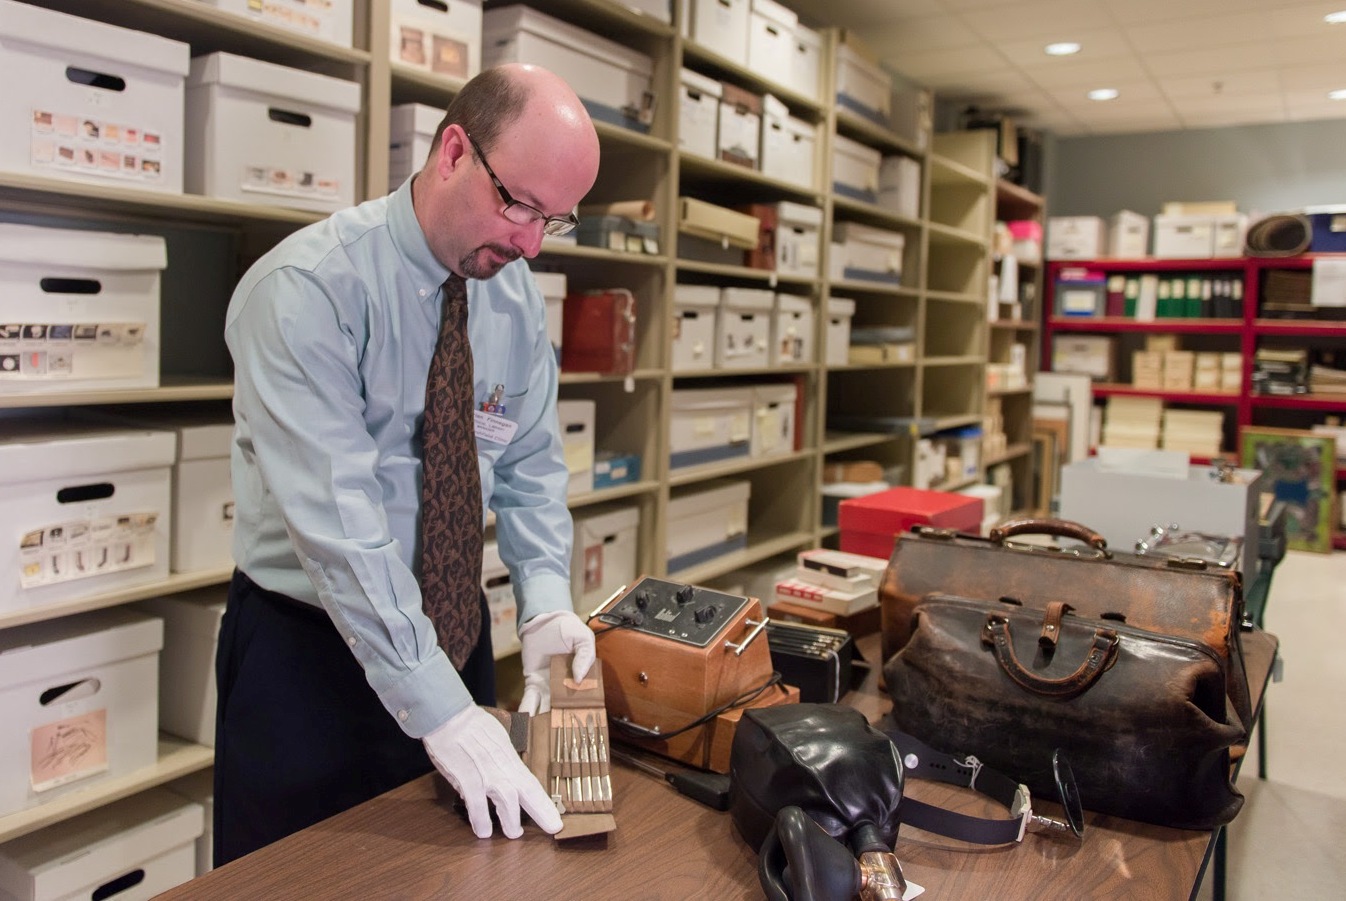 Brian Finnegan, manager of the George E. Magnin Medical Library and History Archive at Marshfield Clinic, displays medical equipment used in years past by clinic physicians.